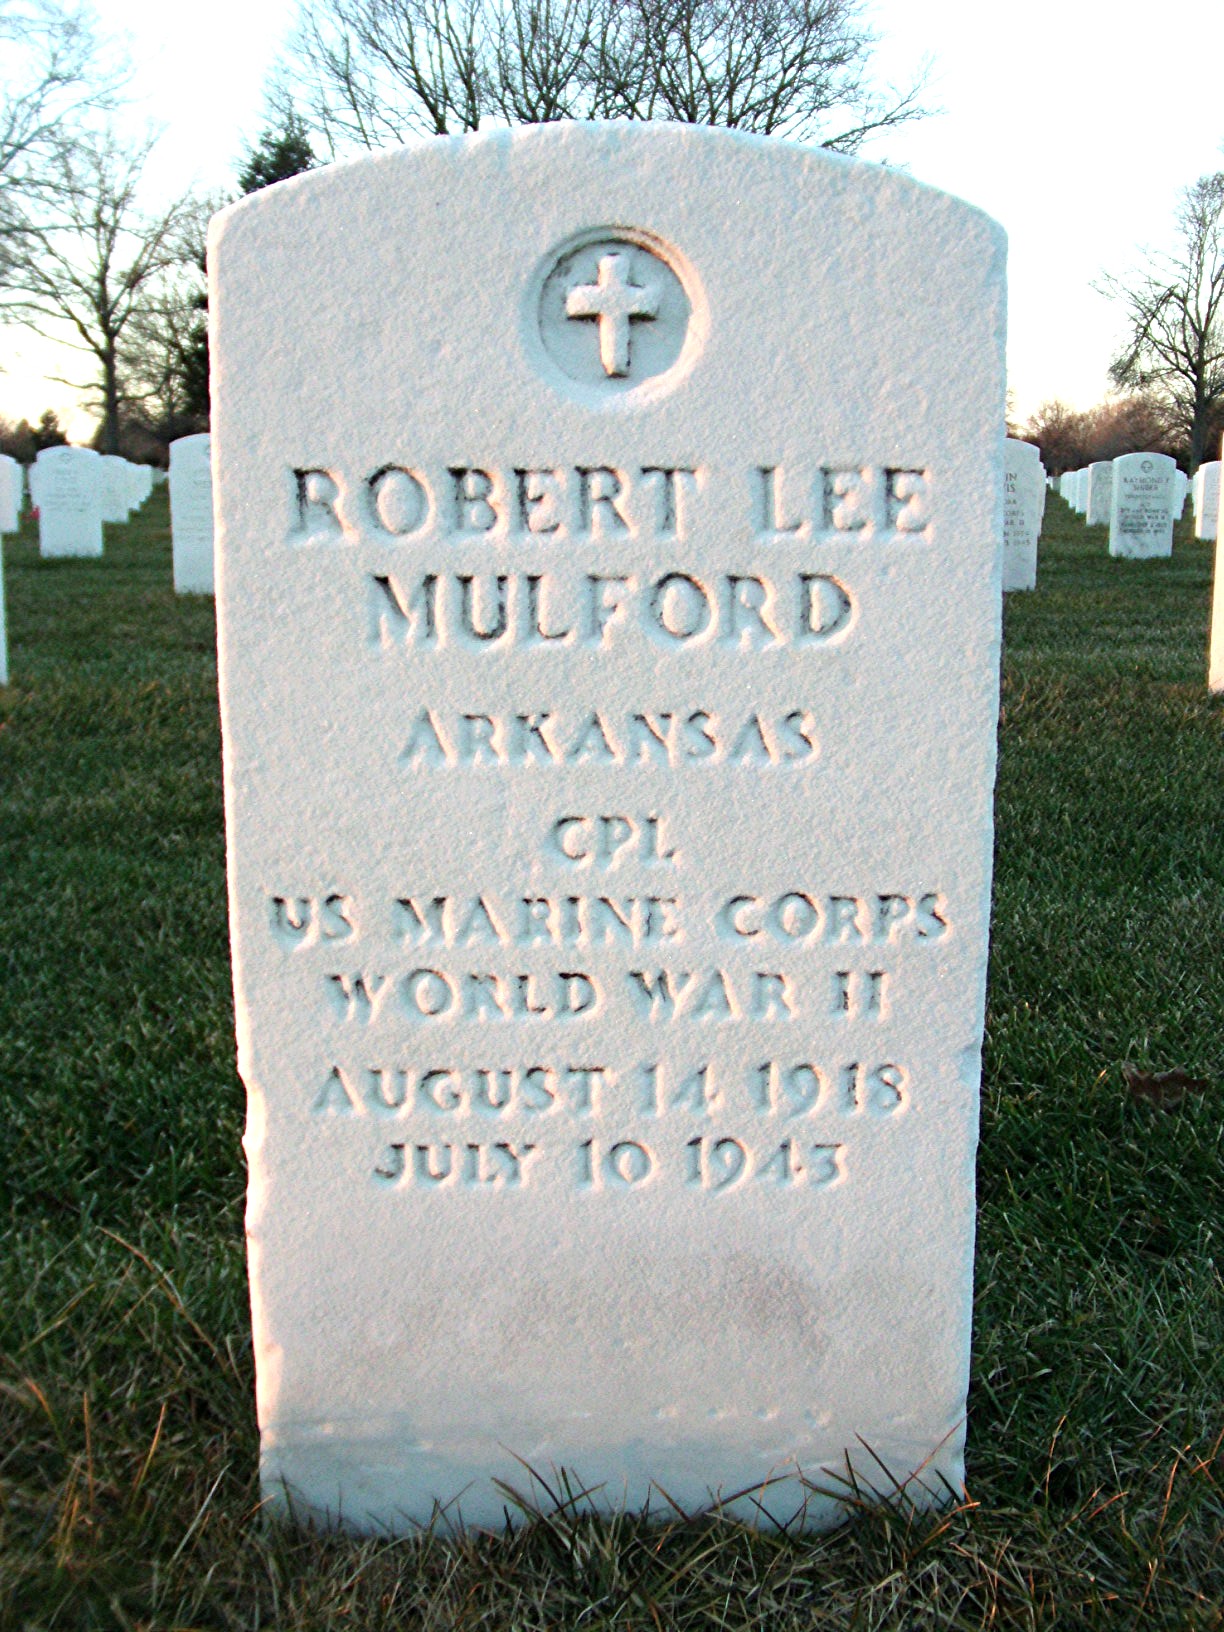 R. Mulford (Grave)